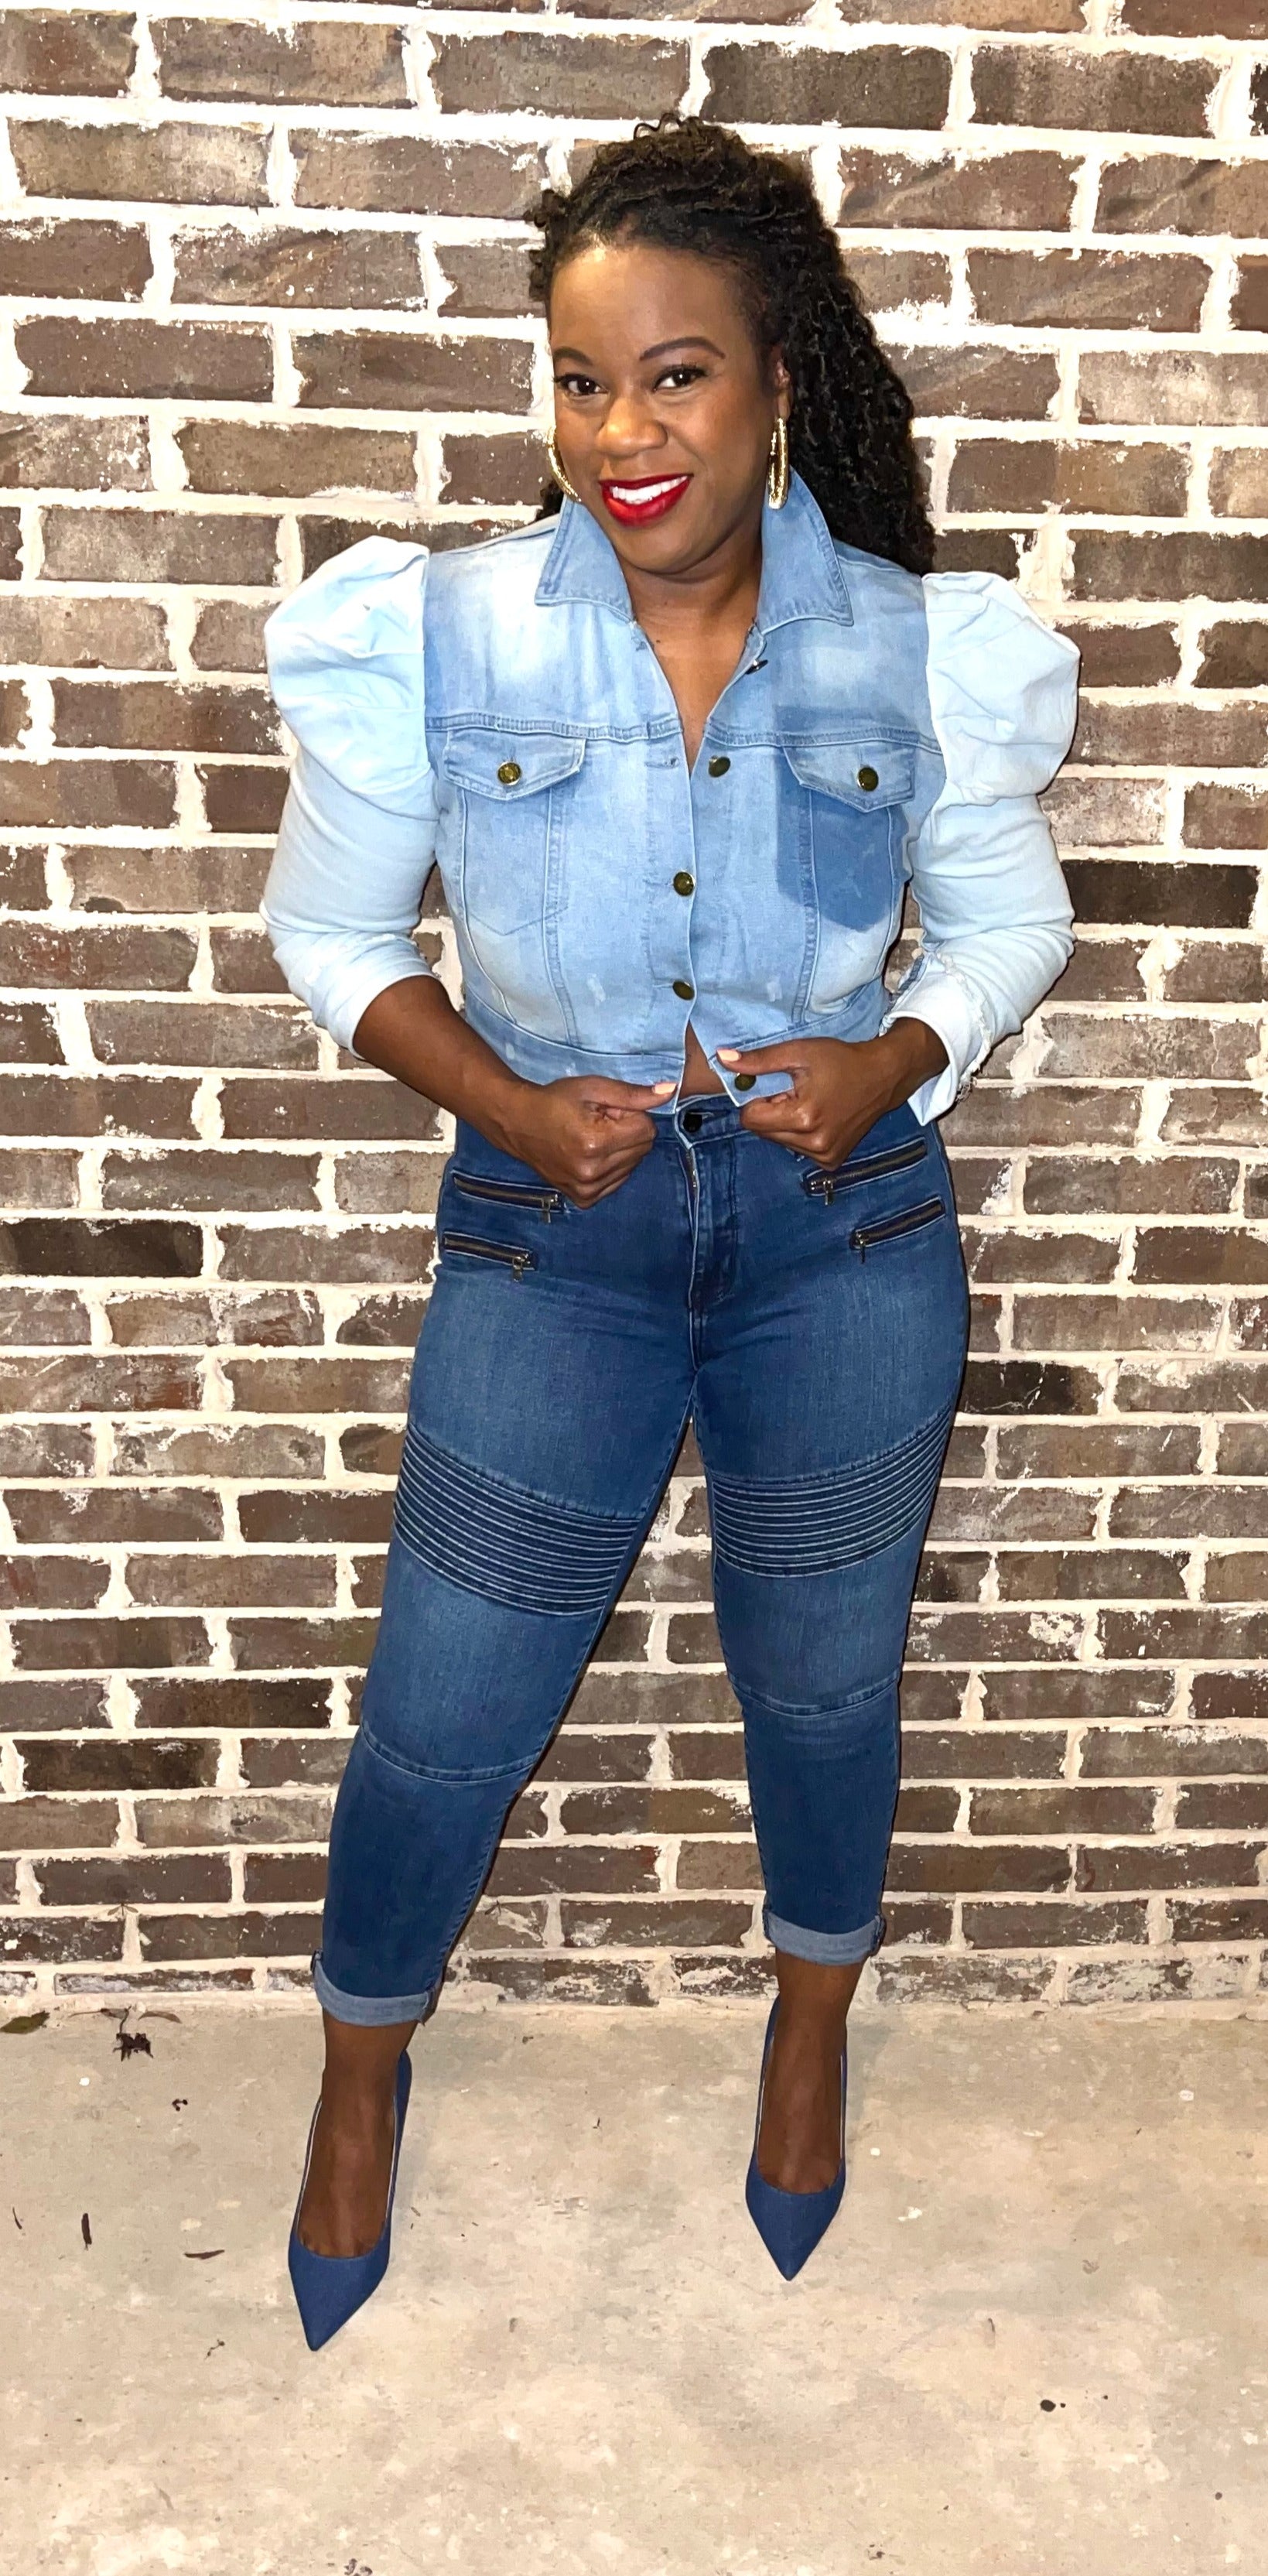 FOR THE LOVE OF DENIM JACKET